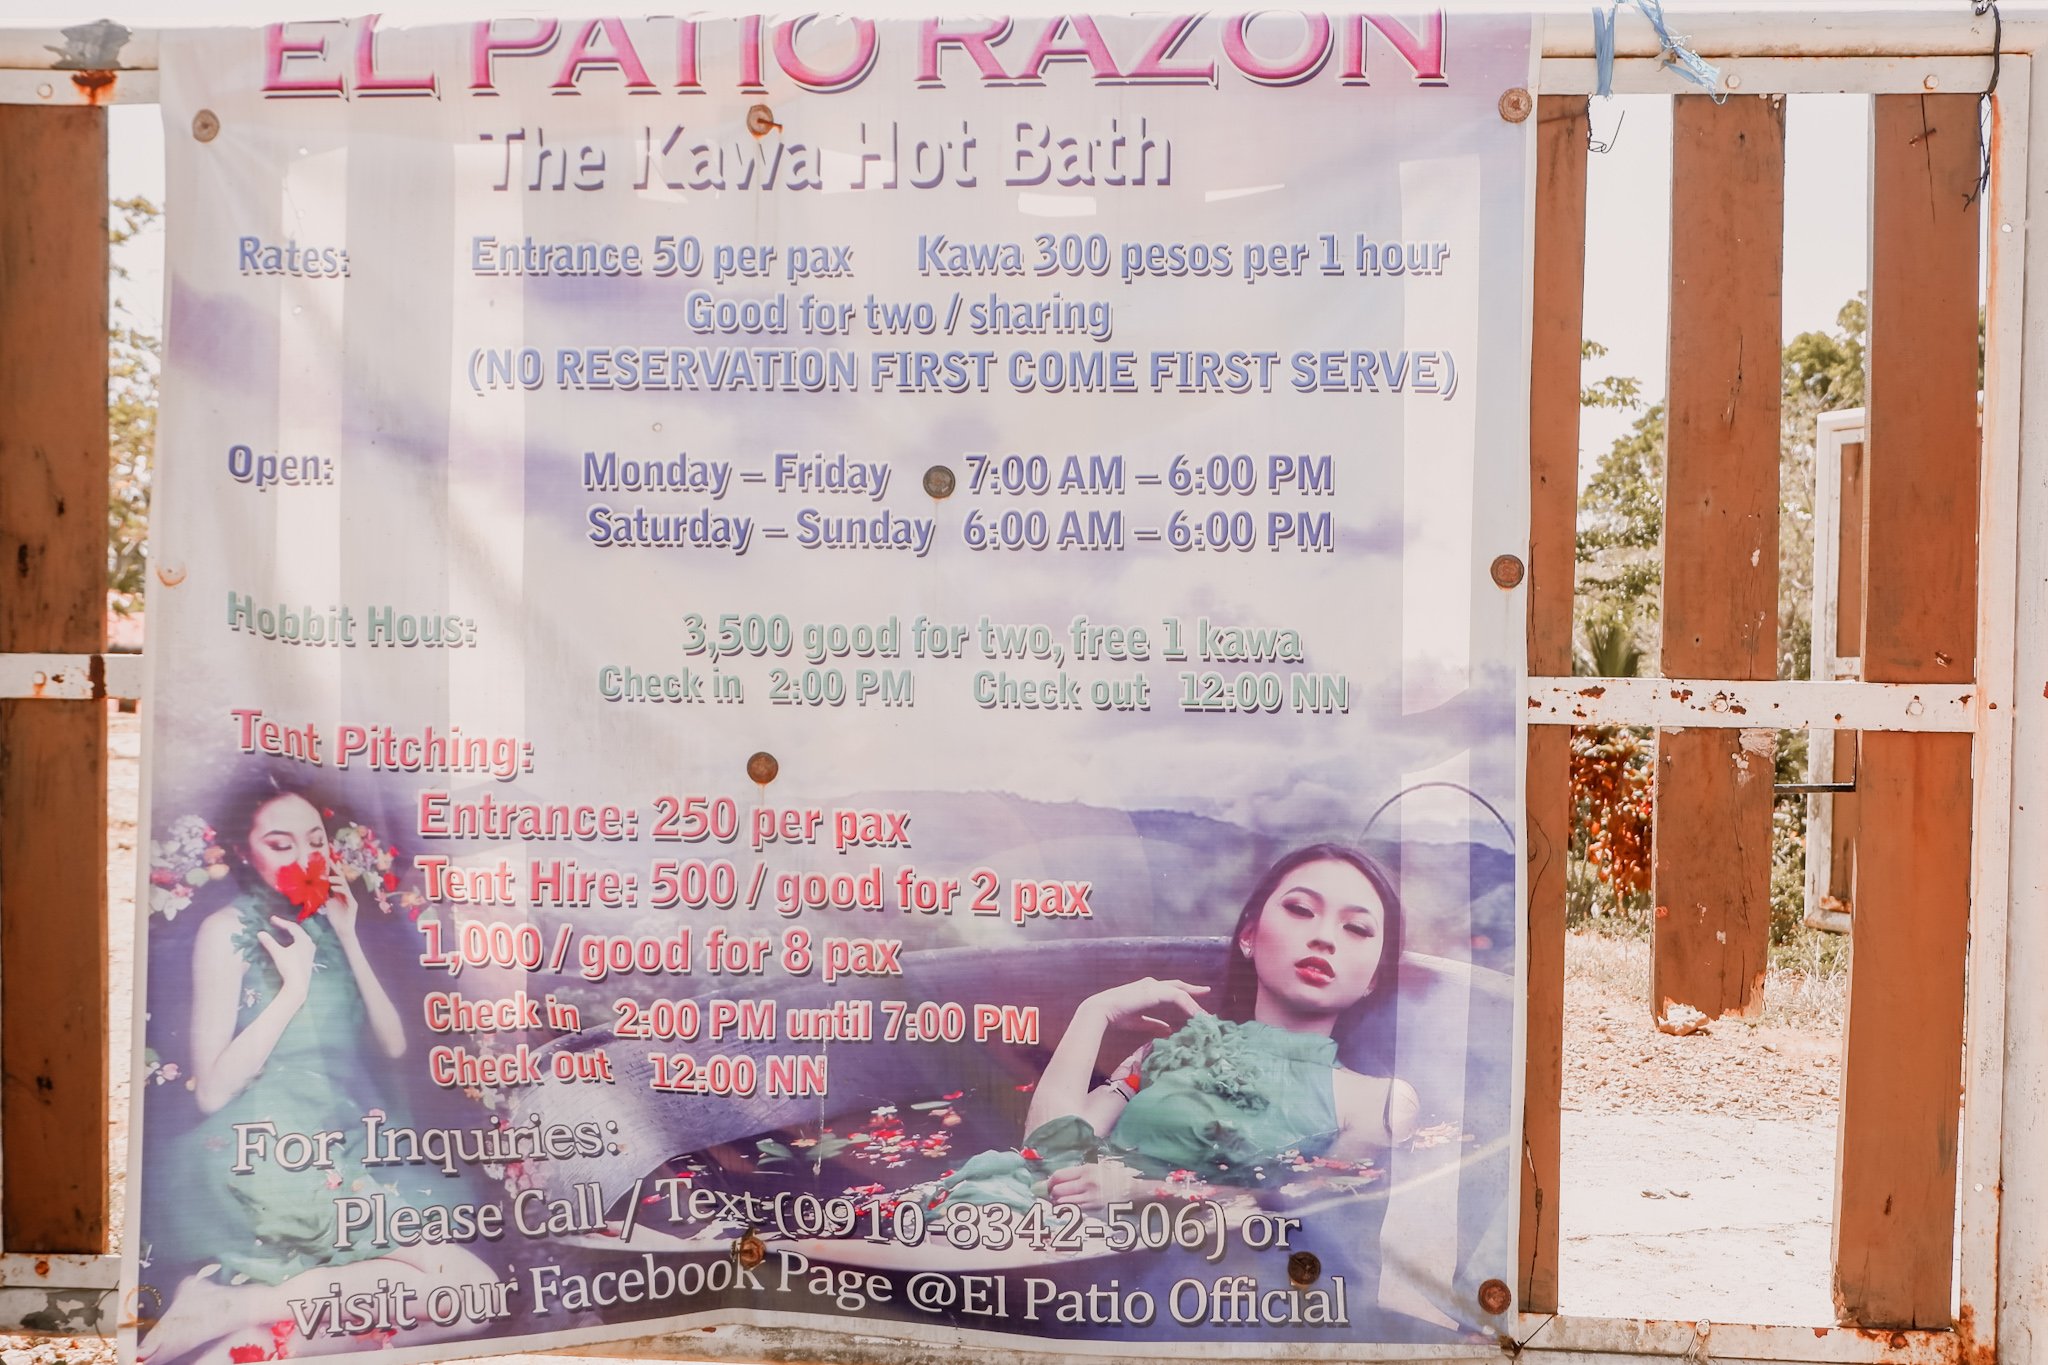 ALT="el patio razon rates for camping and glampling"